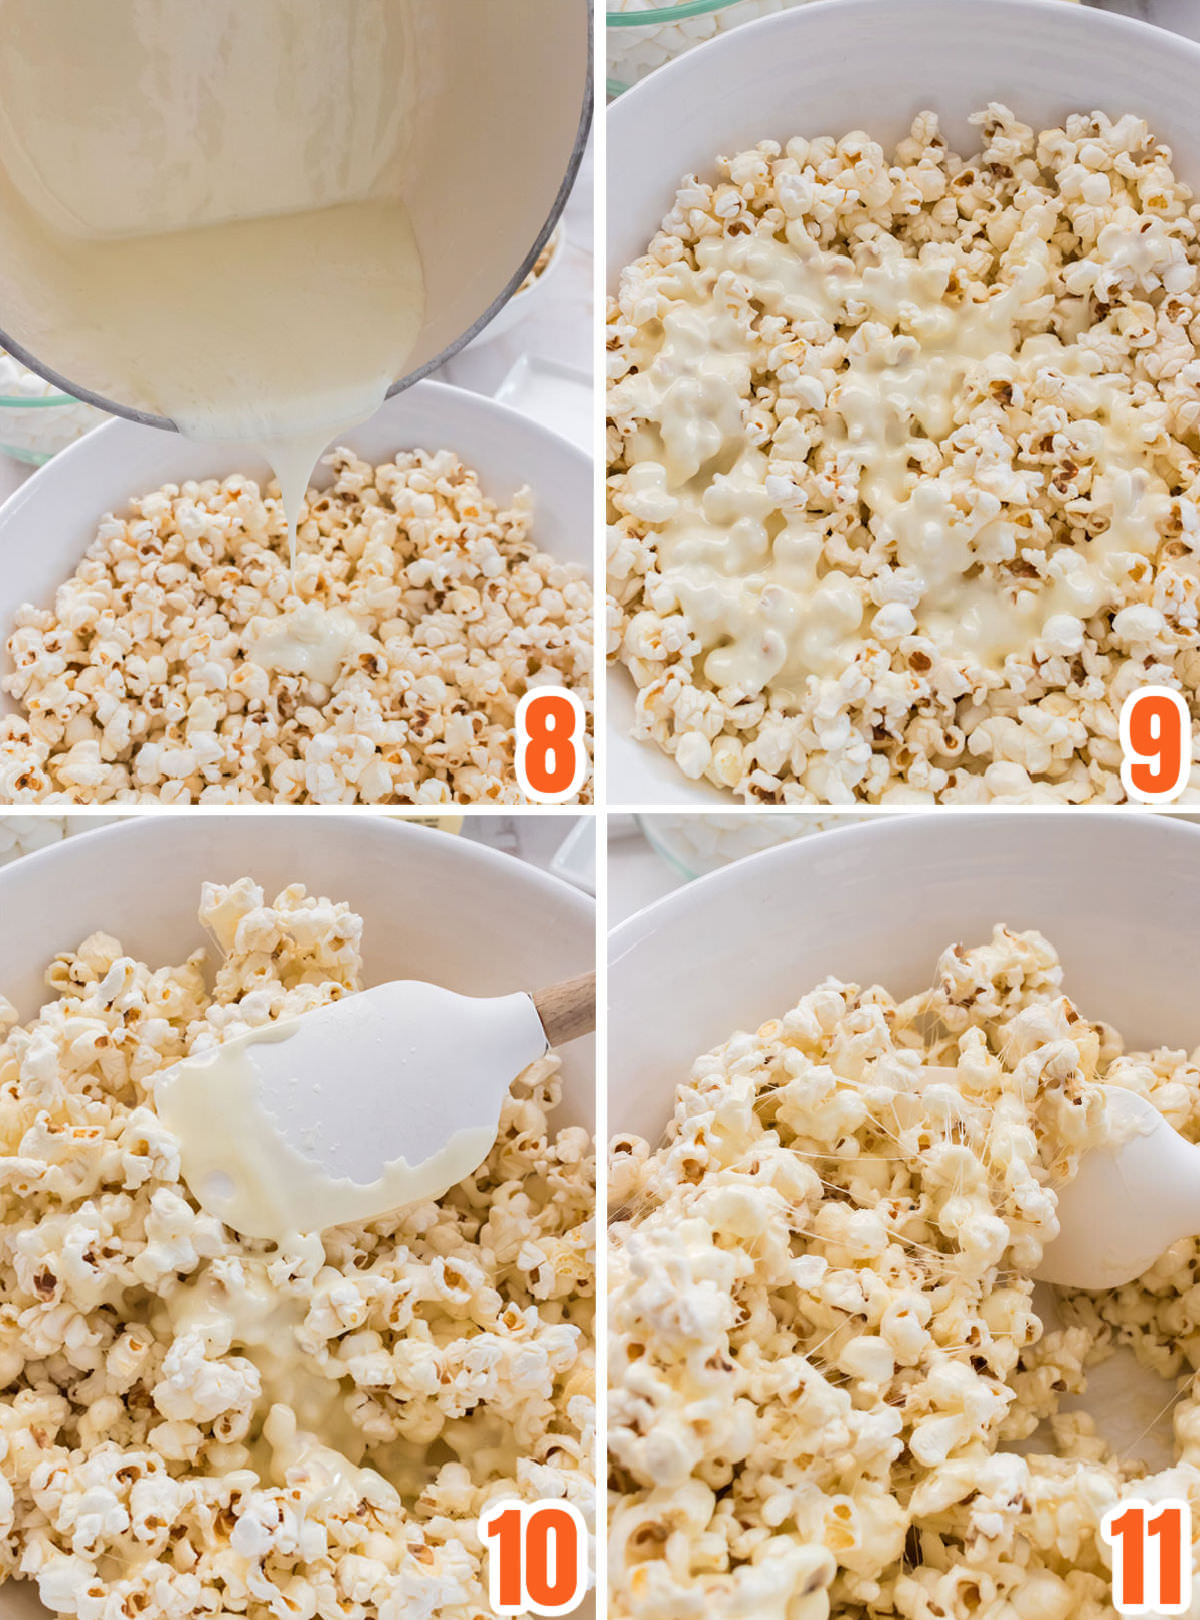 Collage image showing the steps for making Marshmallow Popcorn.